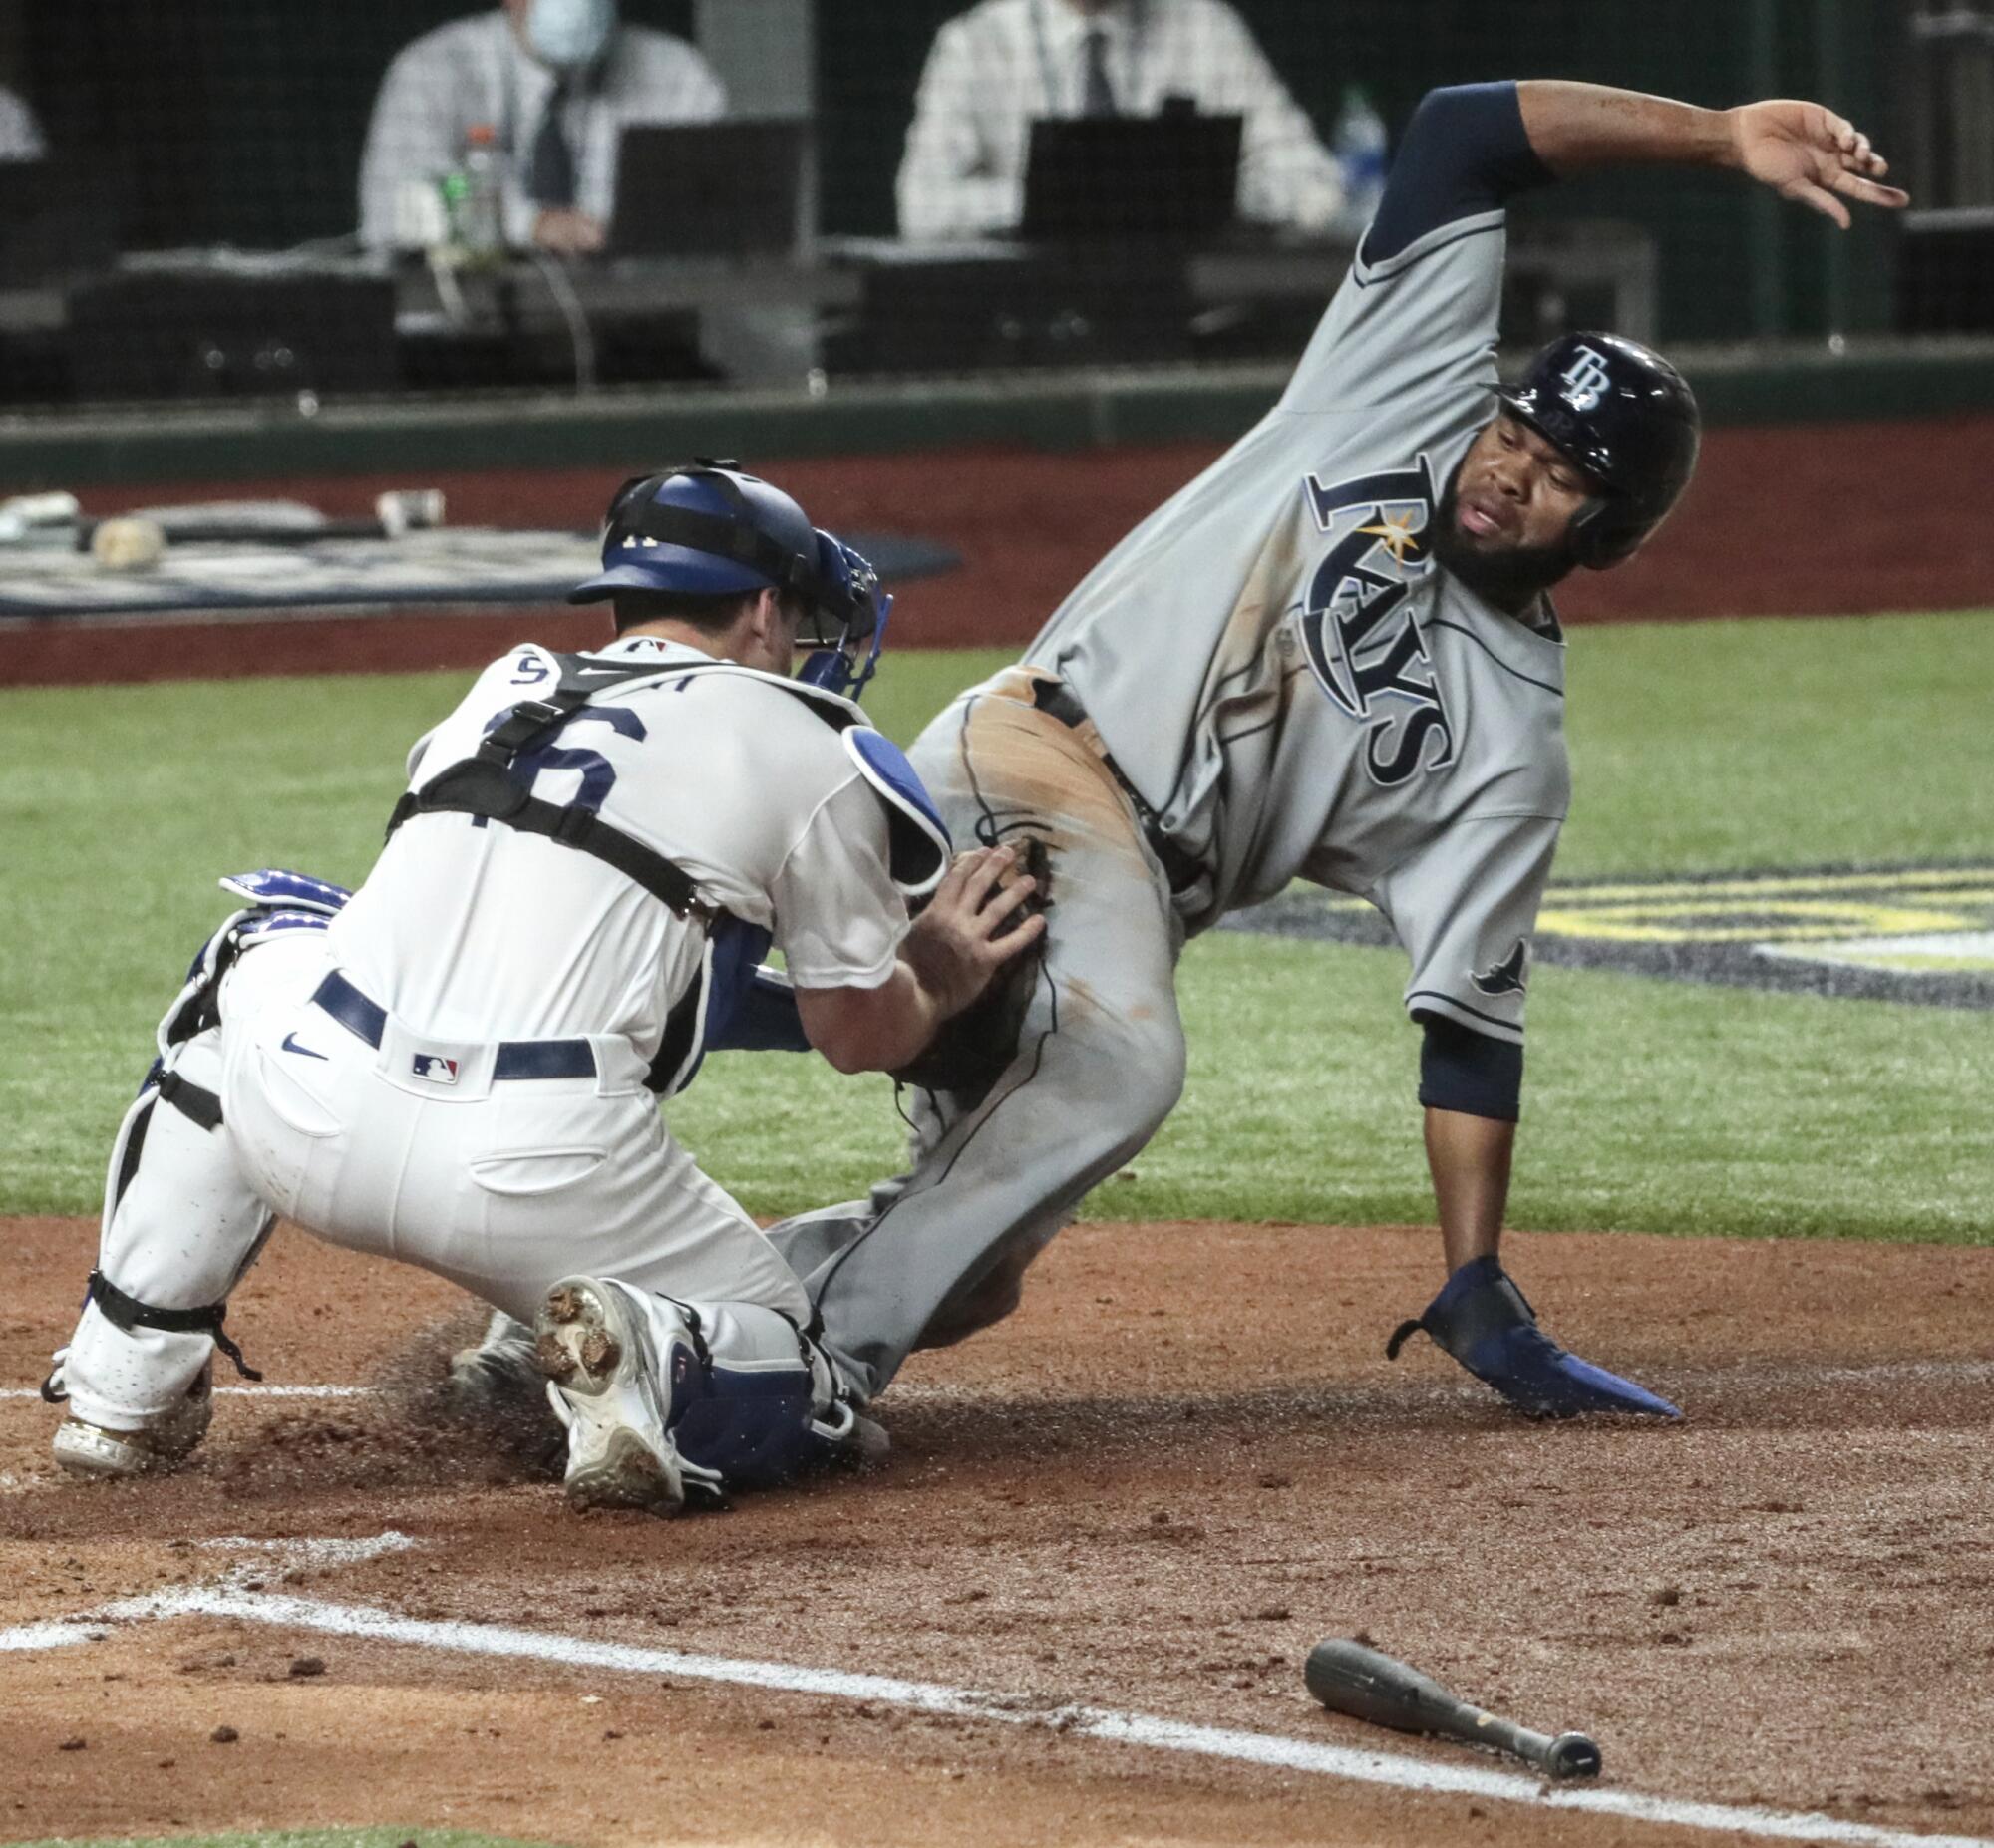 Tampa Bay Rays baserunner Manuel Margot is tagged out at home by Dodgers catcher Will Smith.